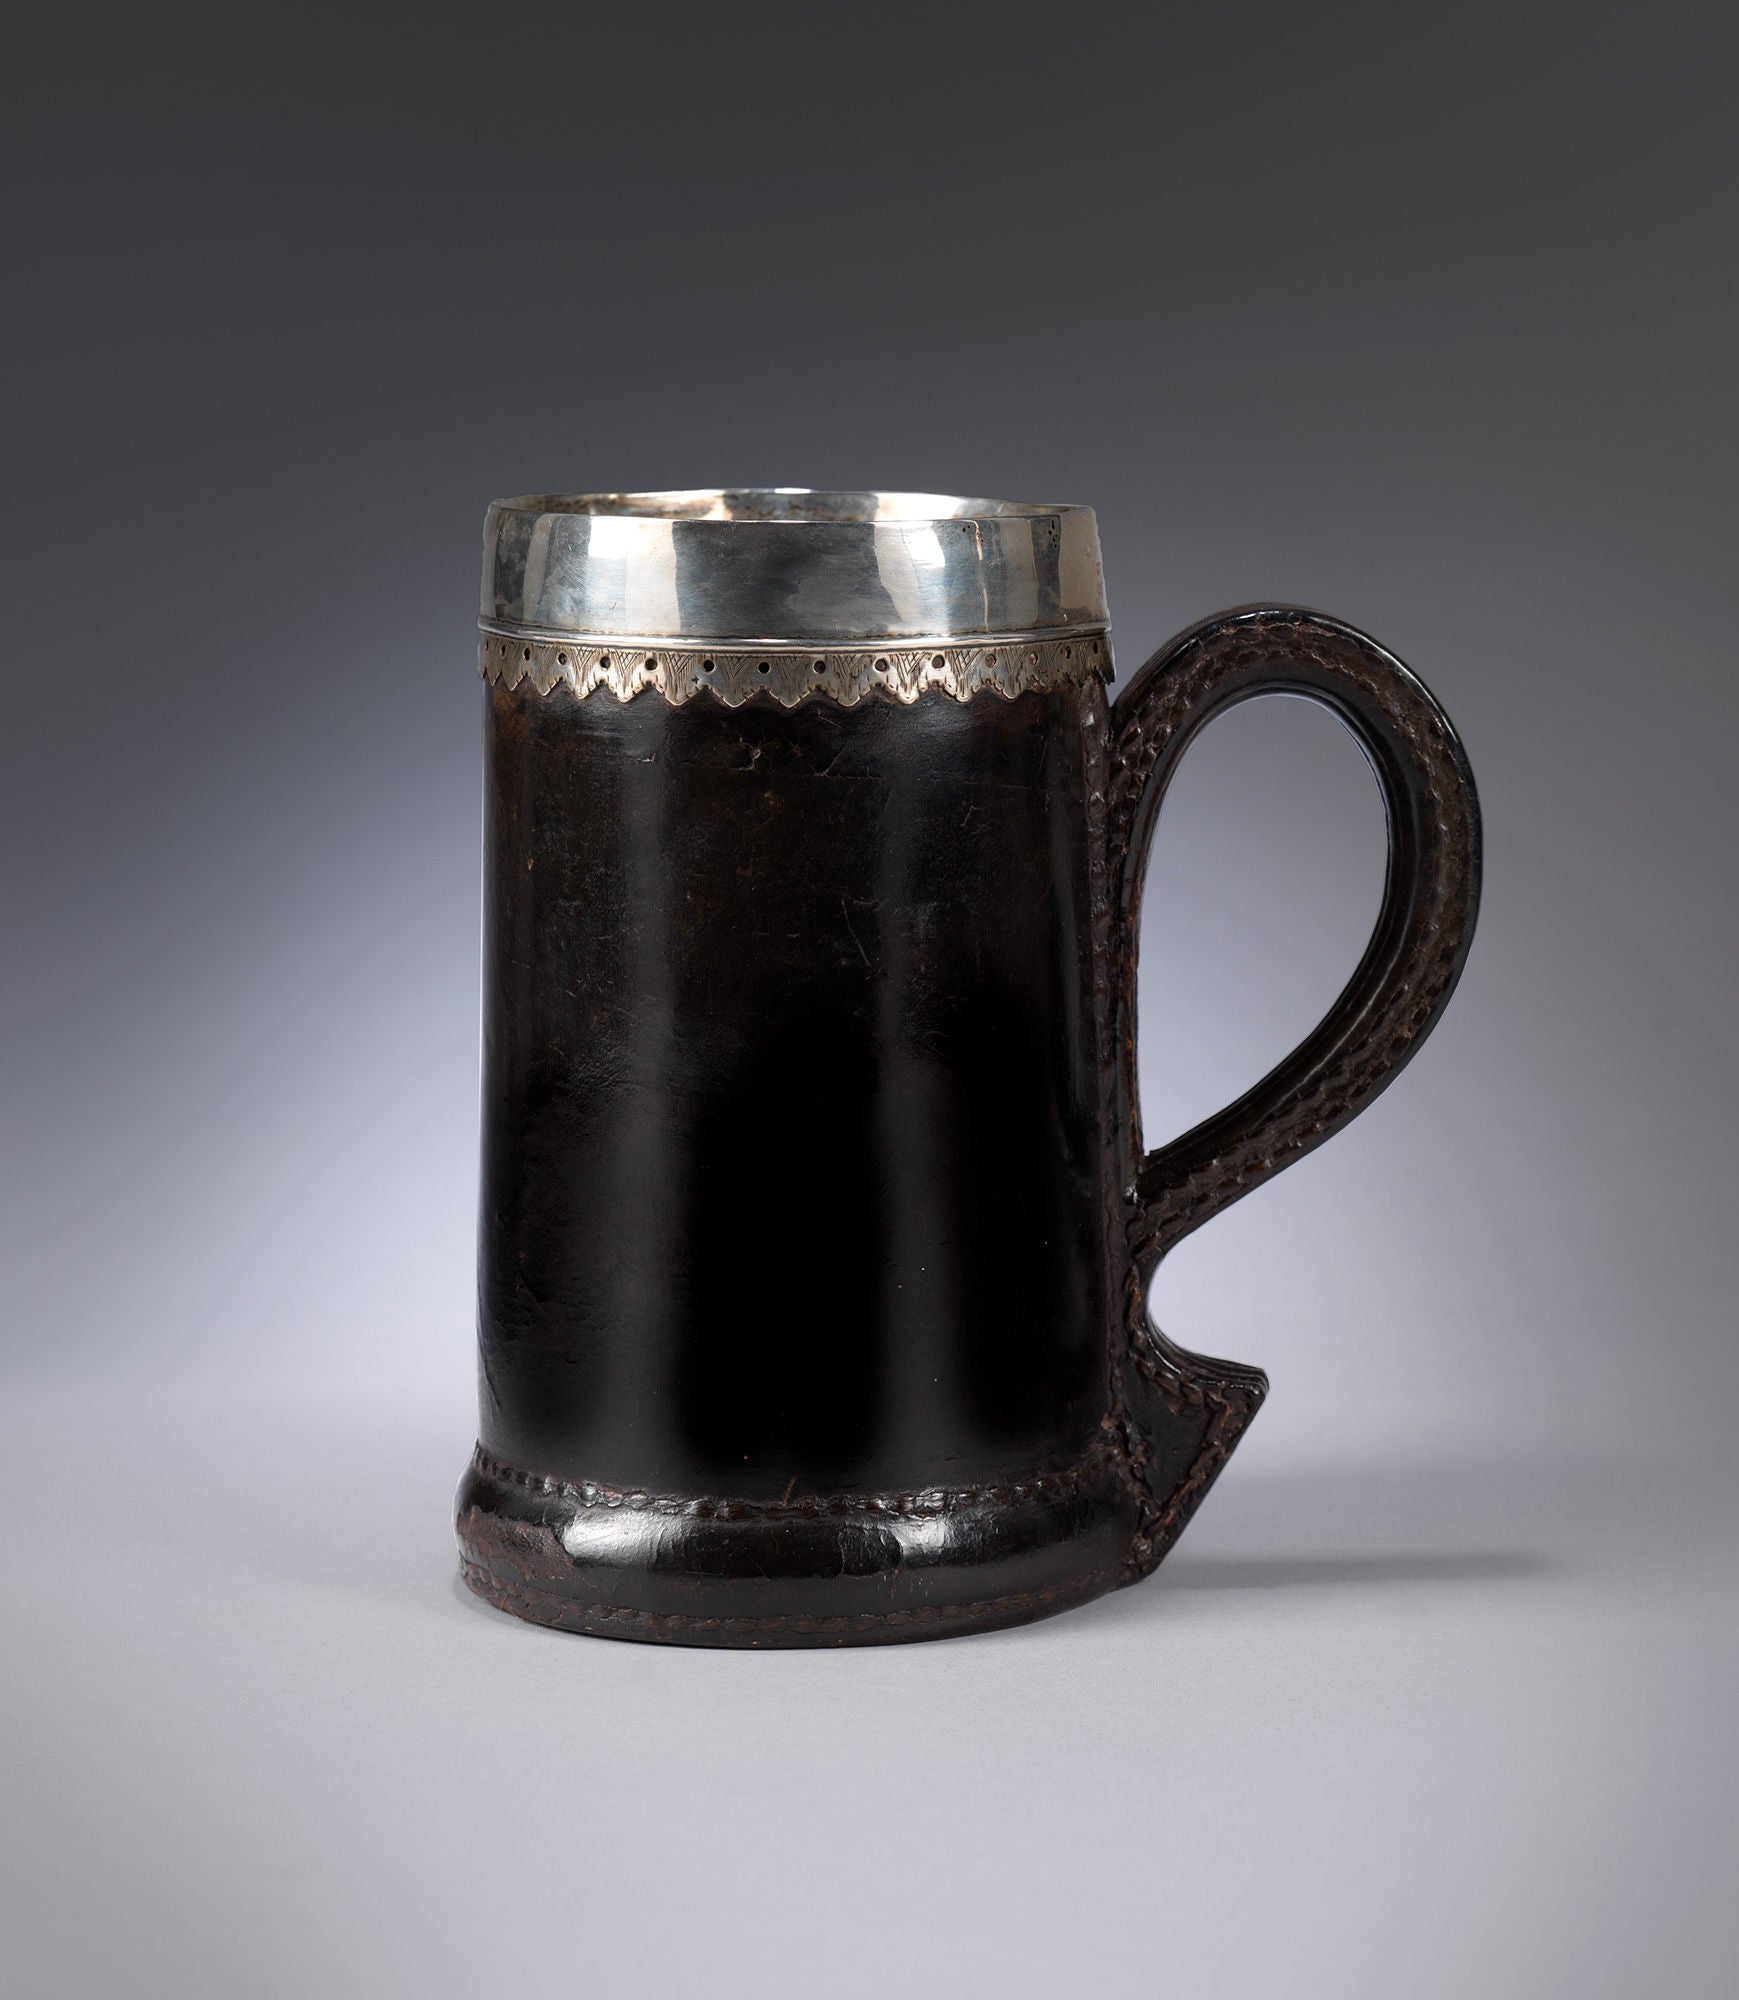 Exemplary Early Silver Mounted "Black Jack" or Tankard